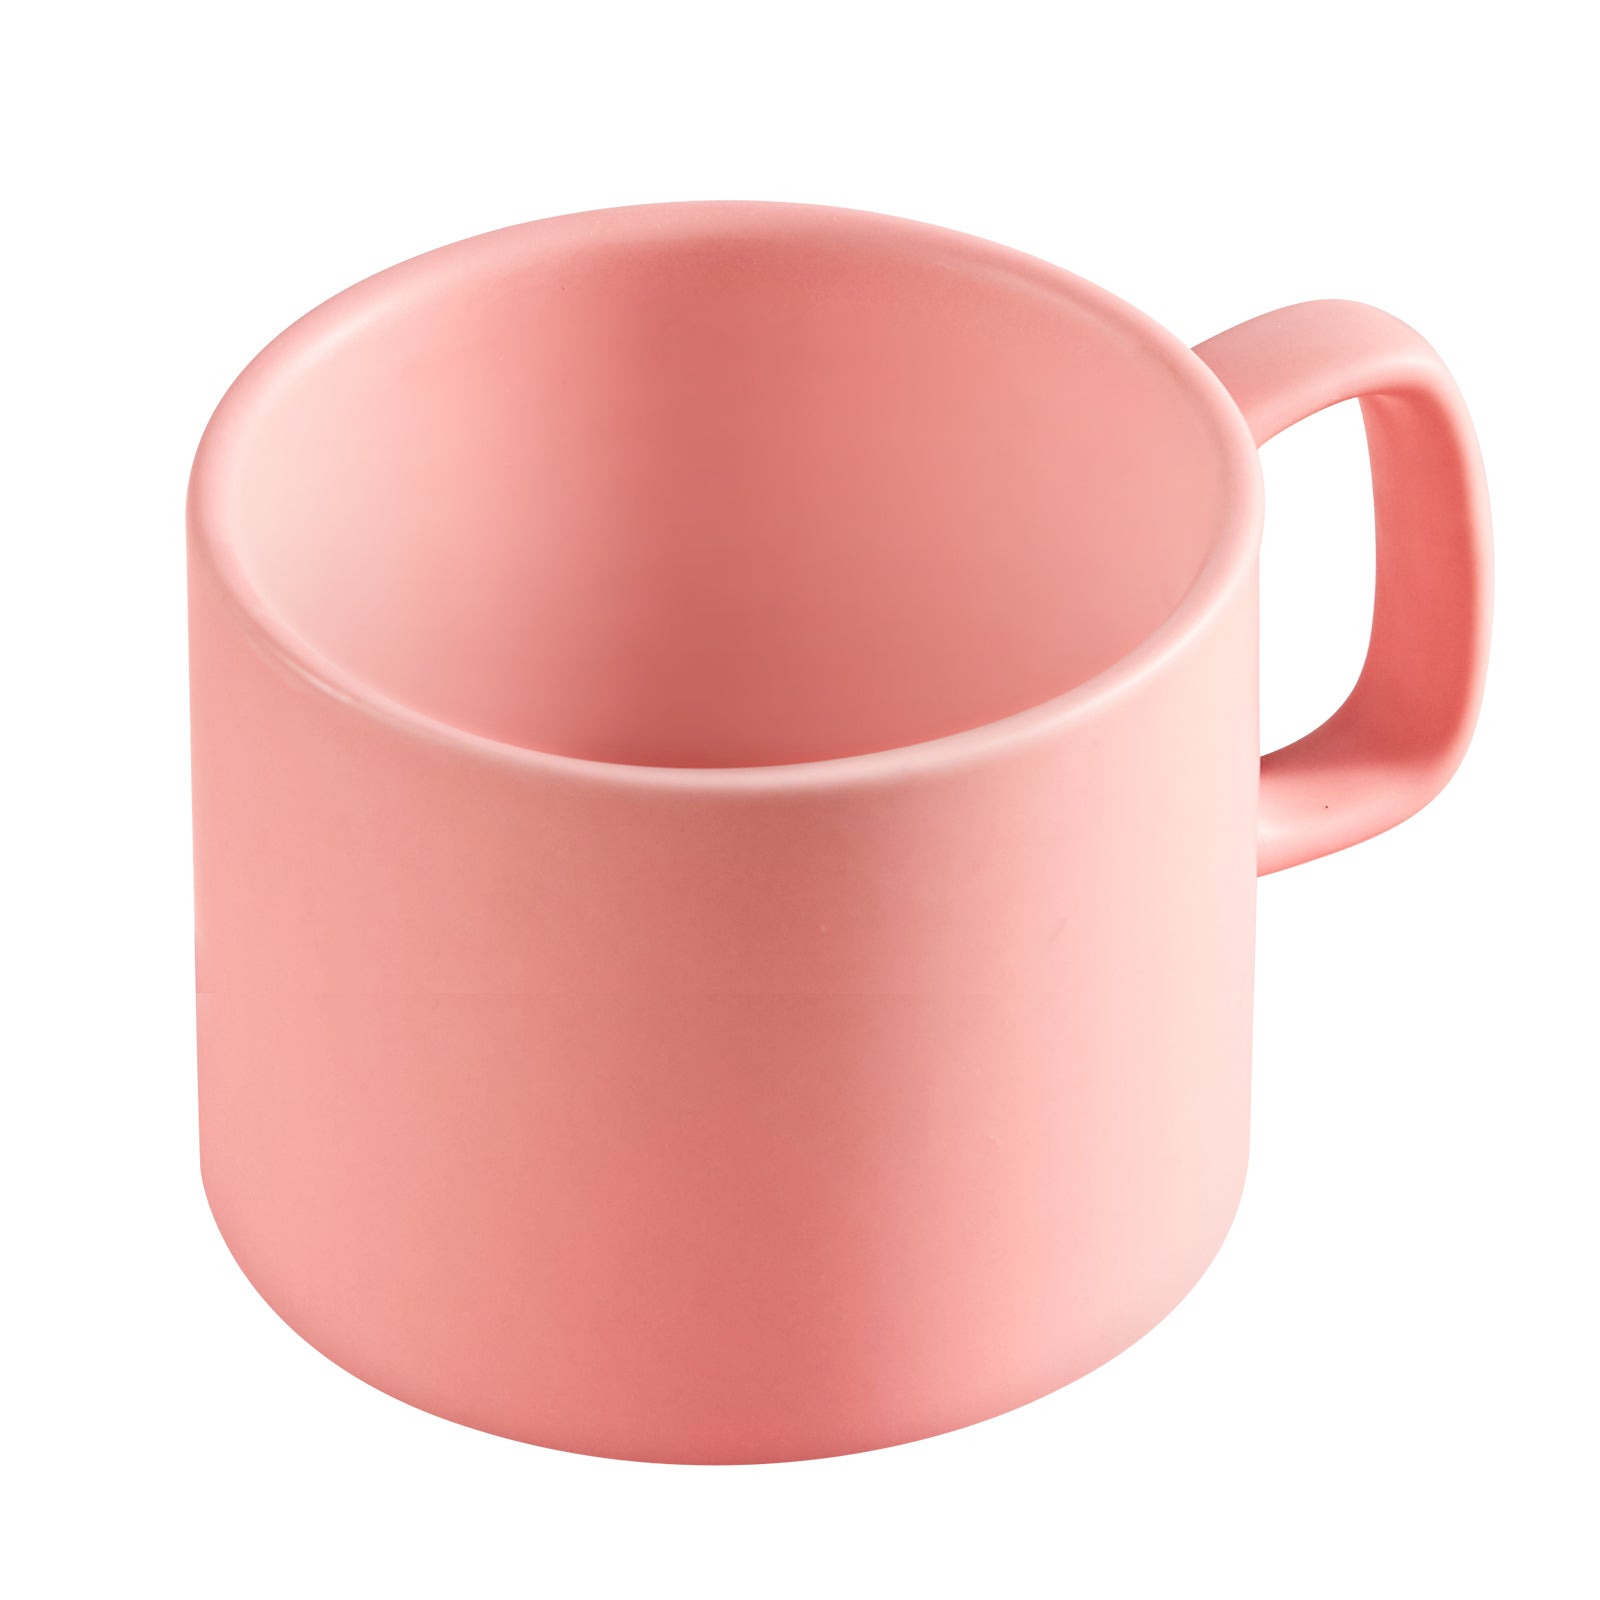 VOBAGA Coffee Mug, Tea Cup for Office and Home, 11 Oz, Dishwasher and Microwave Safe（Pink）